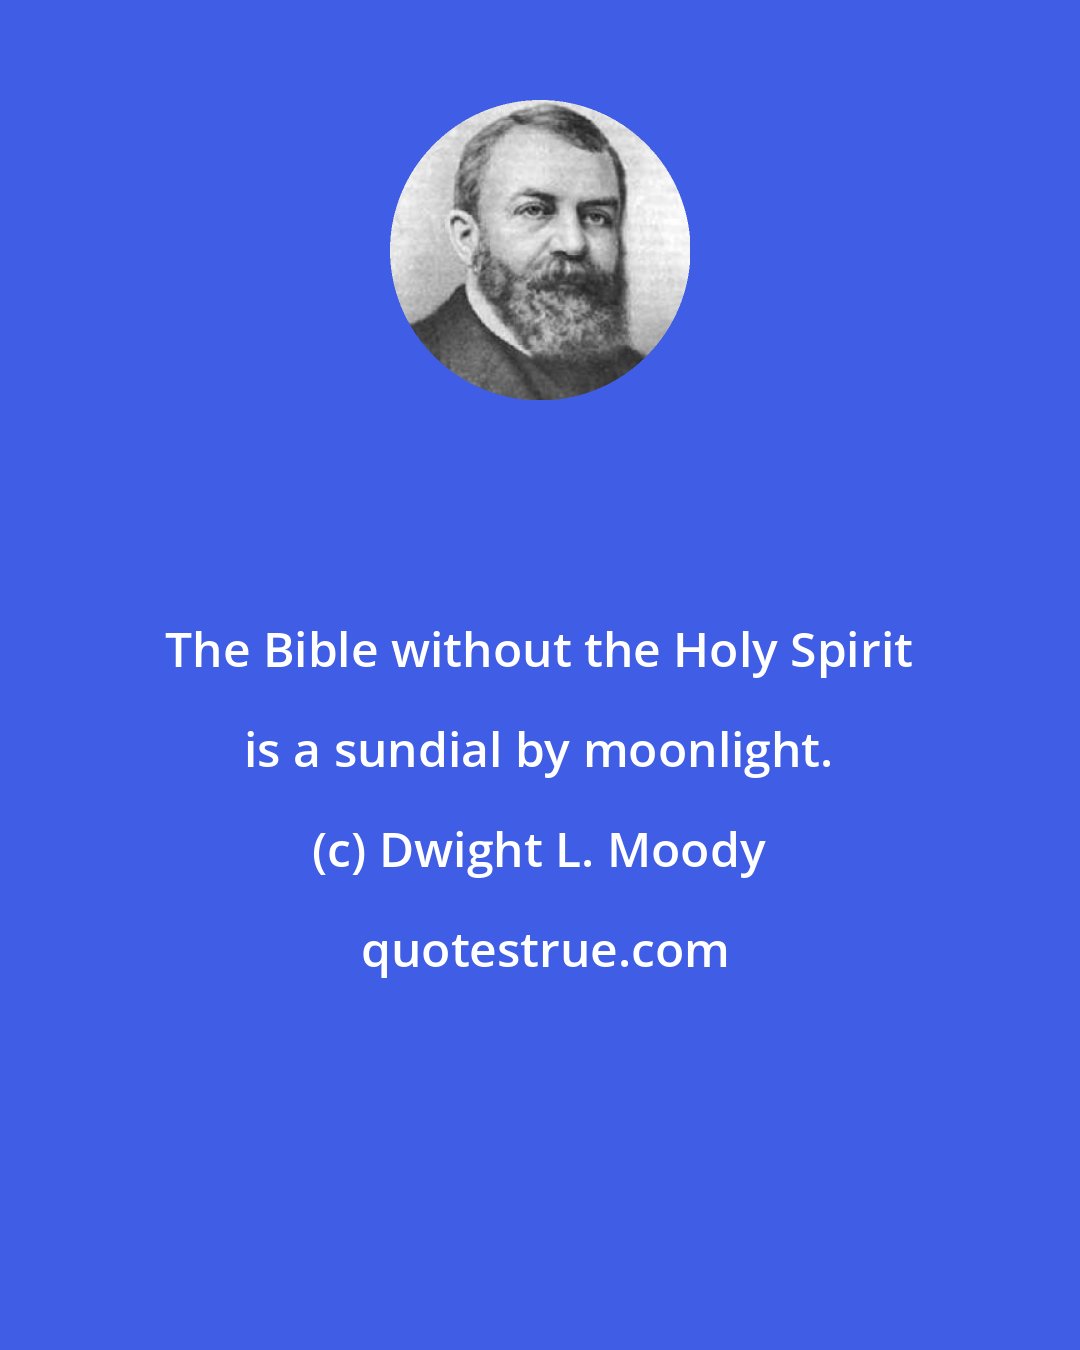 Dwight L. Moody: The Bible without the Holy Spirit is a sundial by moonlight.